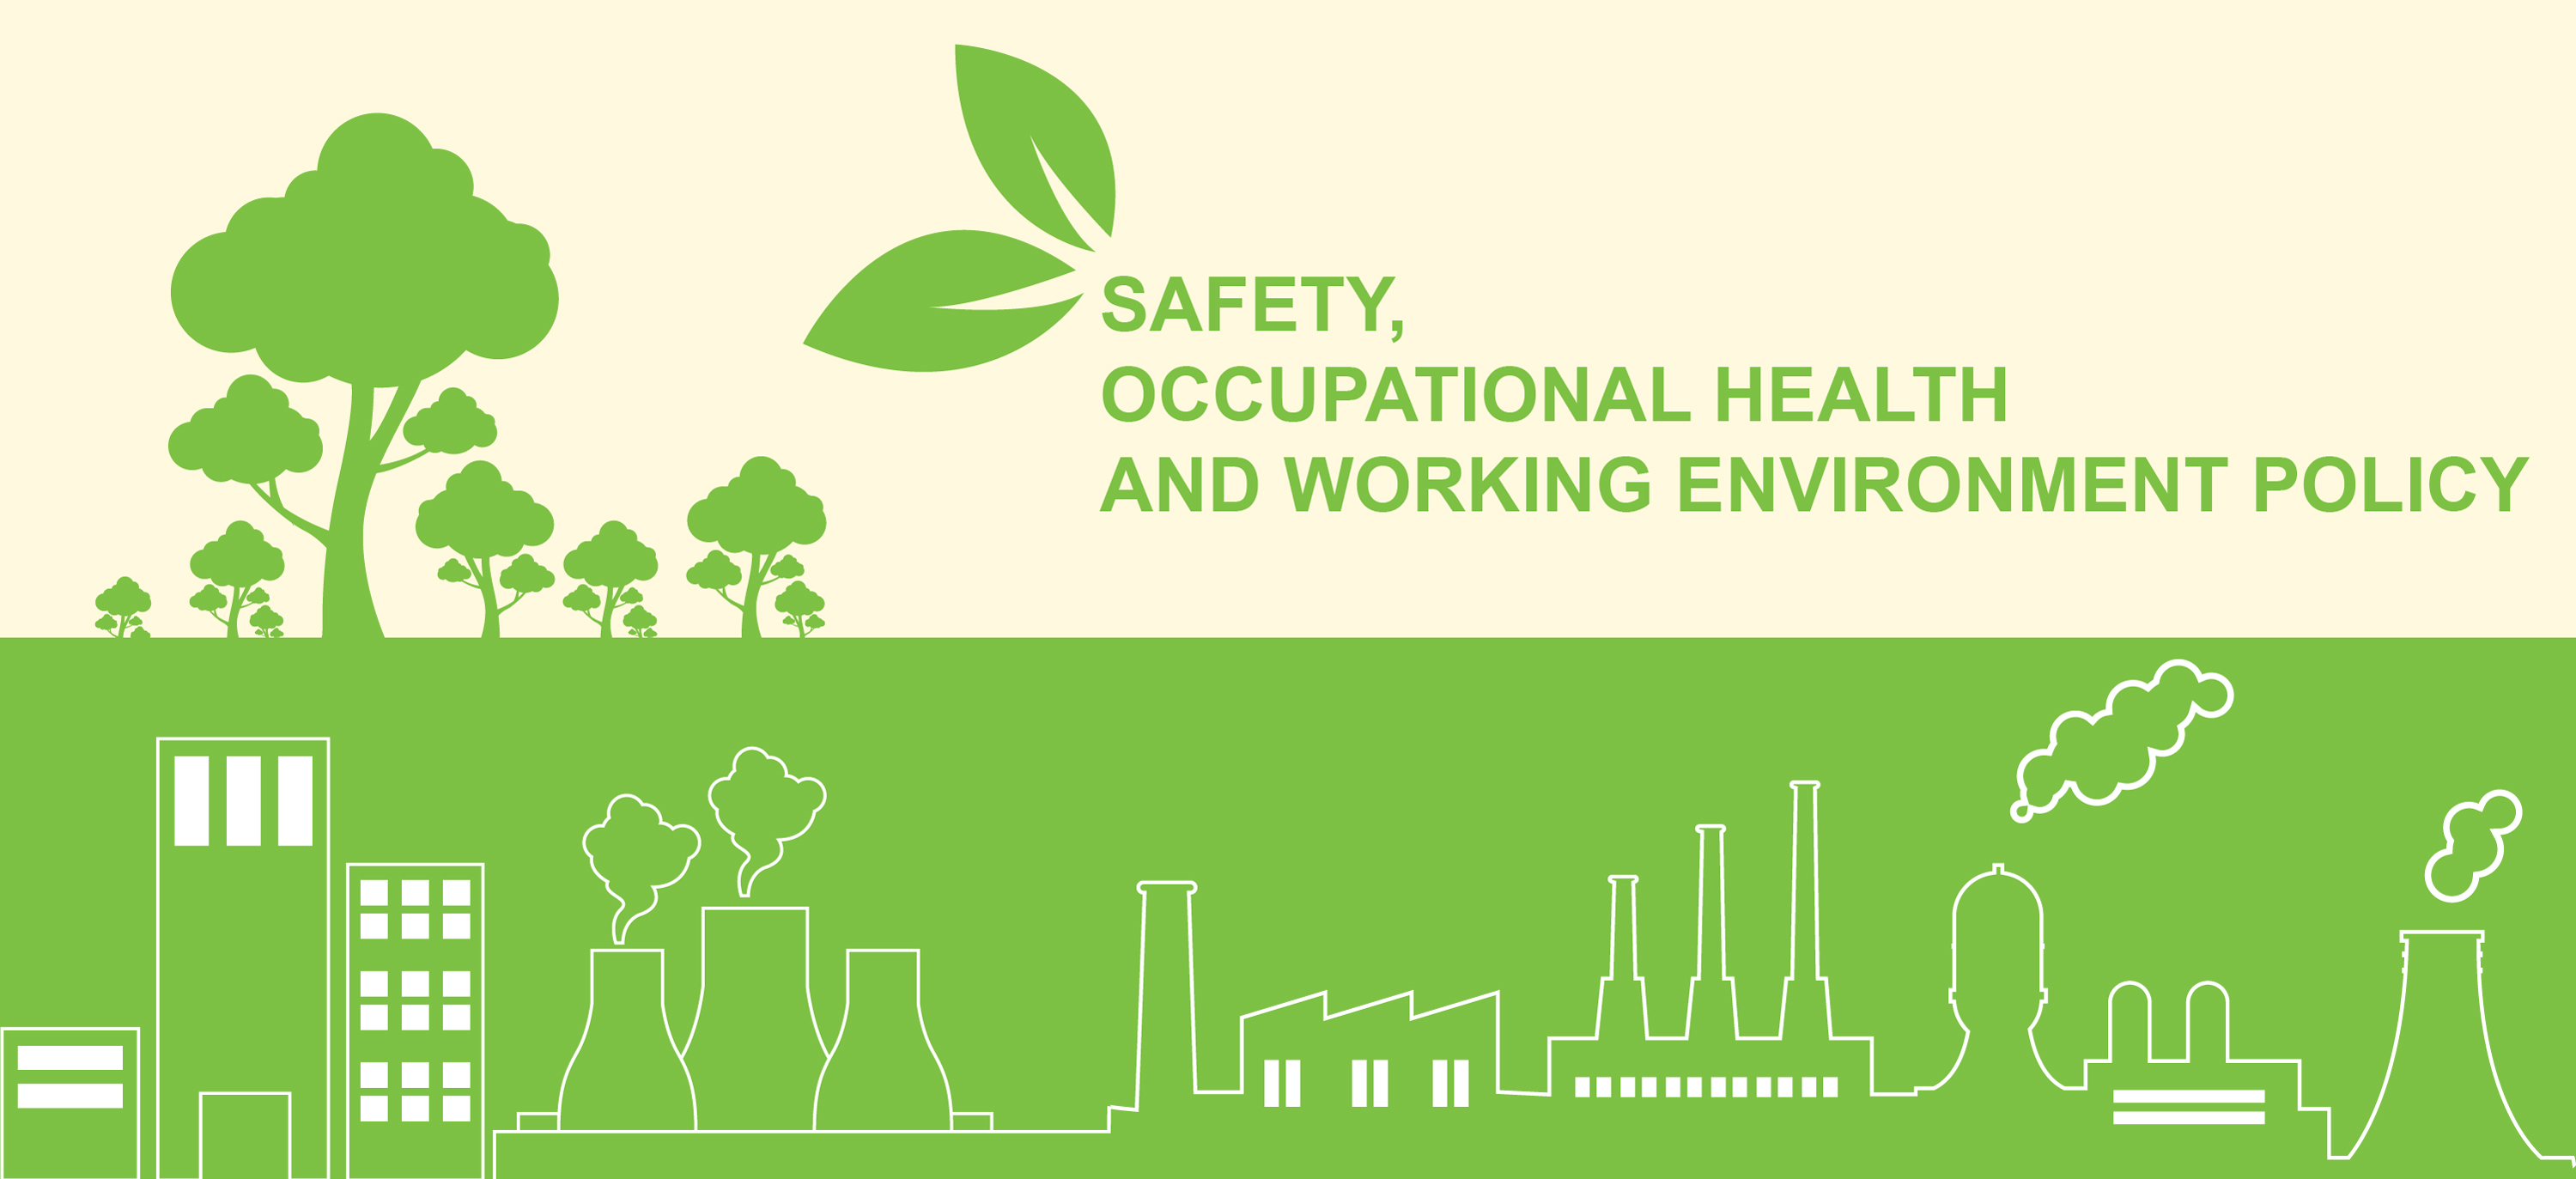 SAFETY, OCCUPATIONAL HEALTH AND WORKING ENVIRONMENT POLICY – Agon Pacific